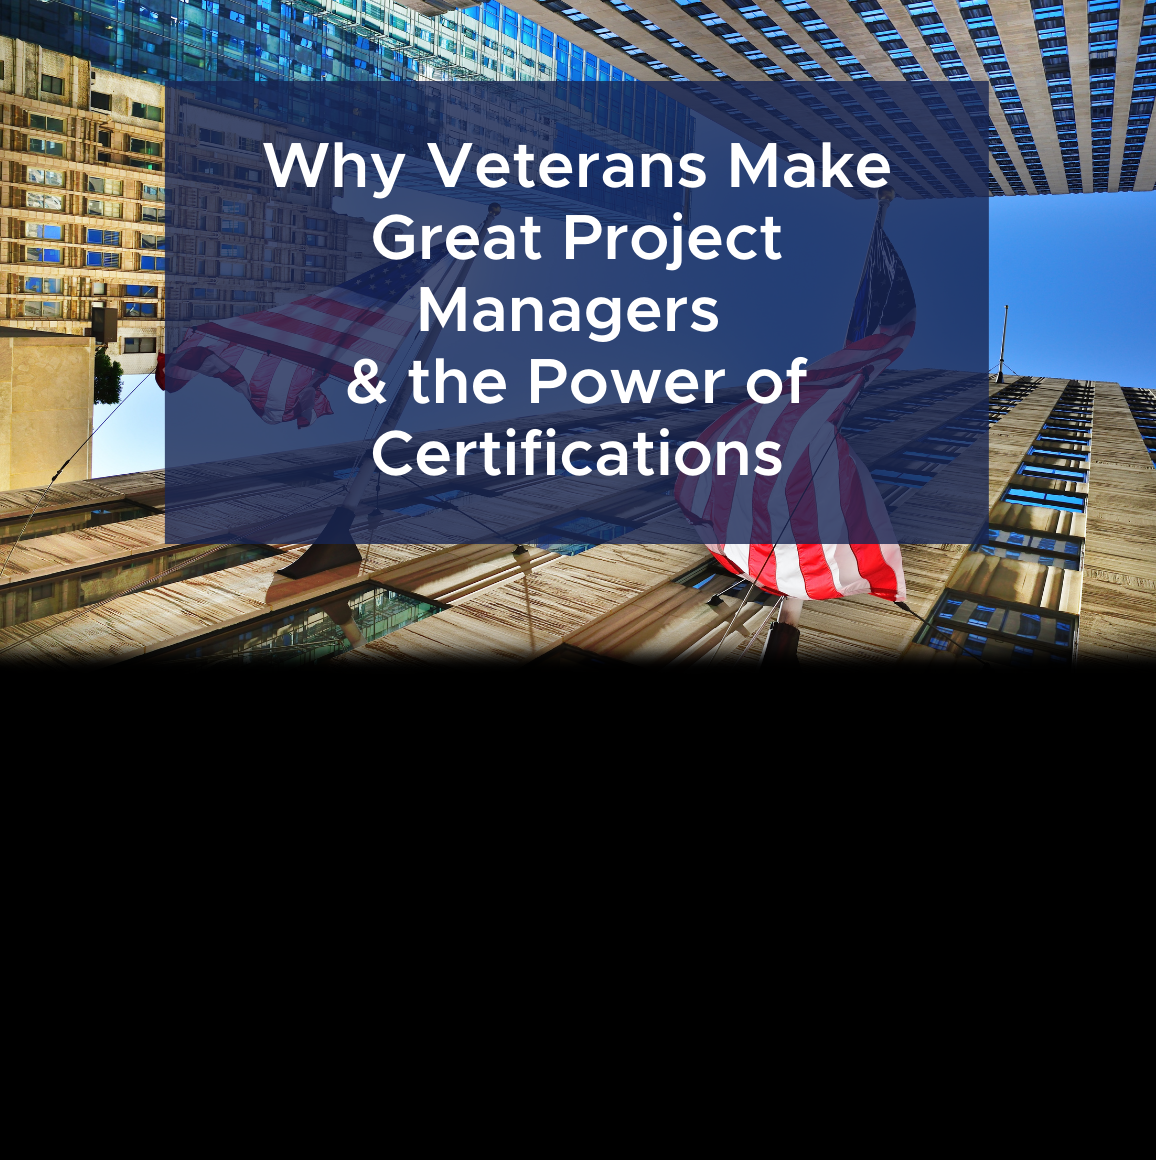 Why Veterans Make Great Project Managers & The Power of Certifications